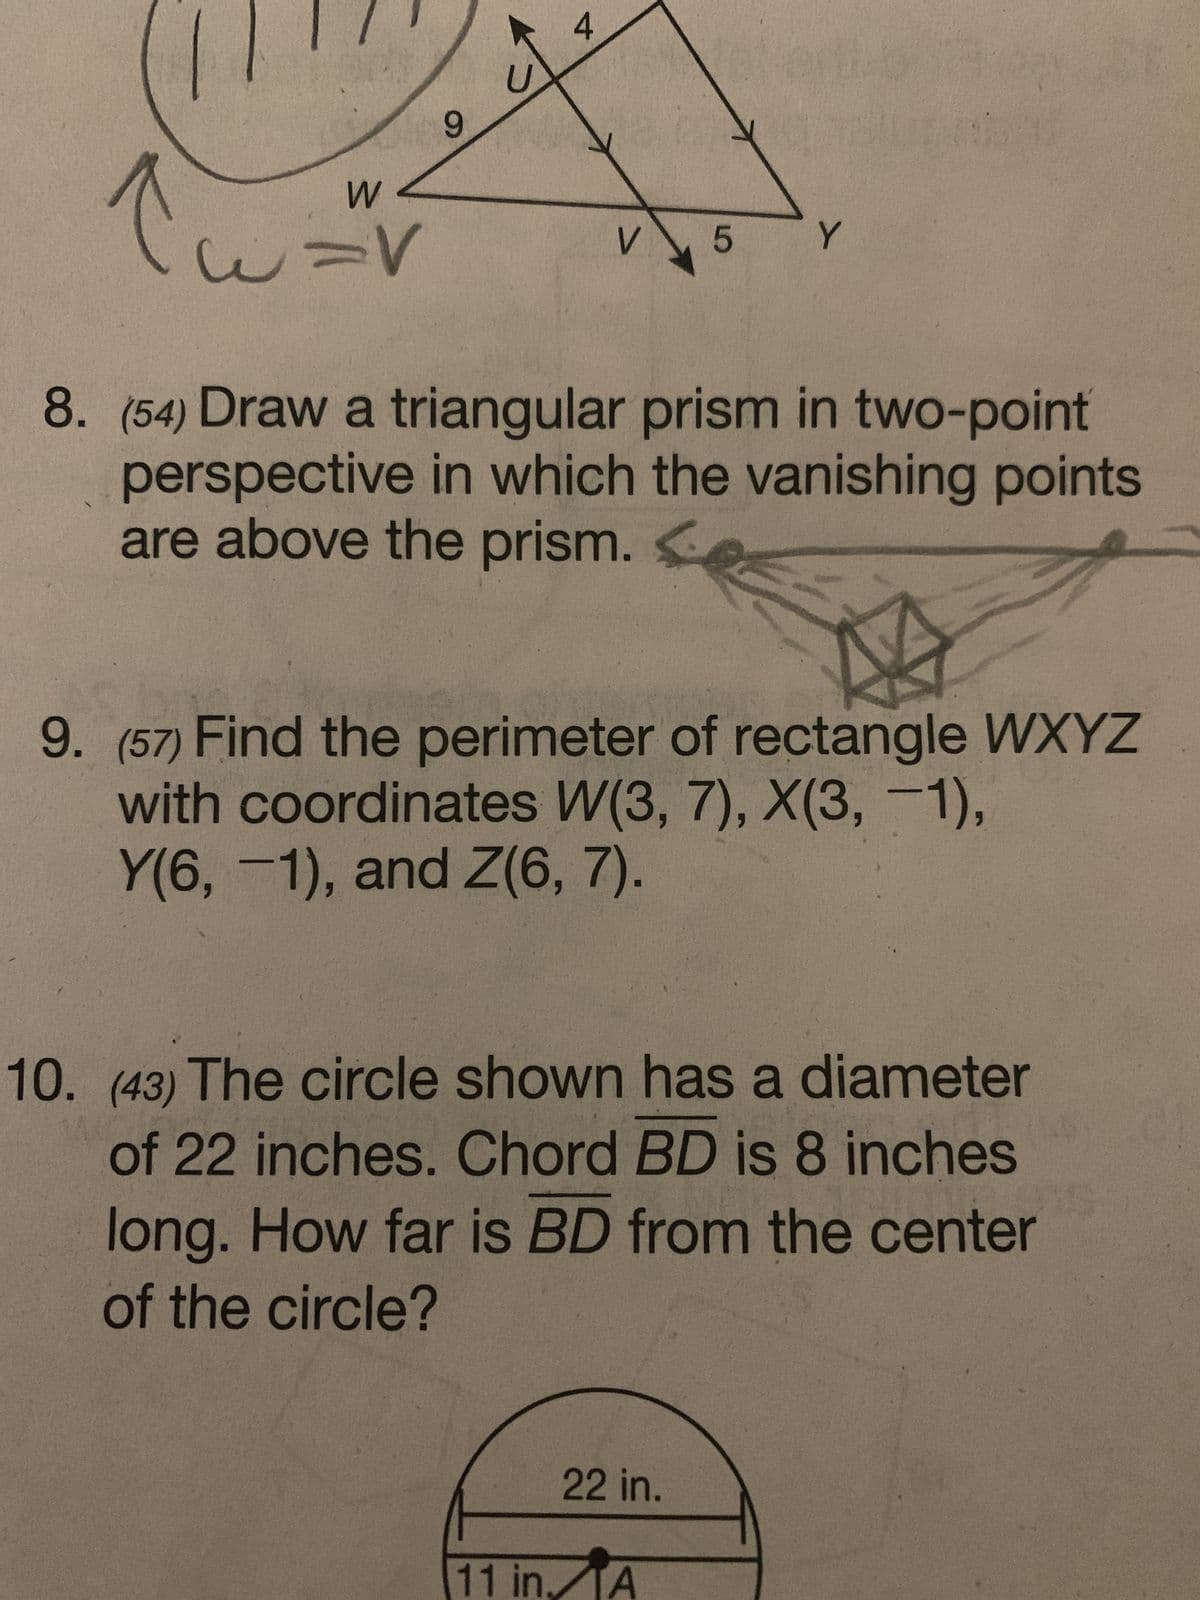 tu
W
U=V
9
4
V 5 Y
8. (54) Draw a triangular prism in two-point
perspective in which the vanishing points
are above the prism.
9. (57) Find the perimeter of rectangle WXYZ
with coordinates W(3, 7), X(3, -1),
Y(6, -1), and Z(6, 7).
10. (43) The circle shown has a diameter
of 22 inches. Chord BD is 8 inches
long. How far is BD from the center
of the circle?
22 in.
11 in. A